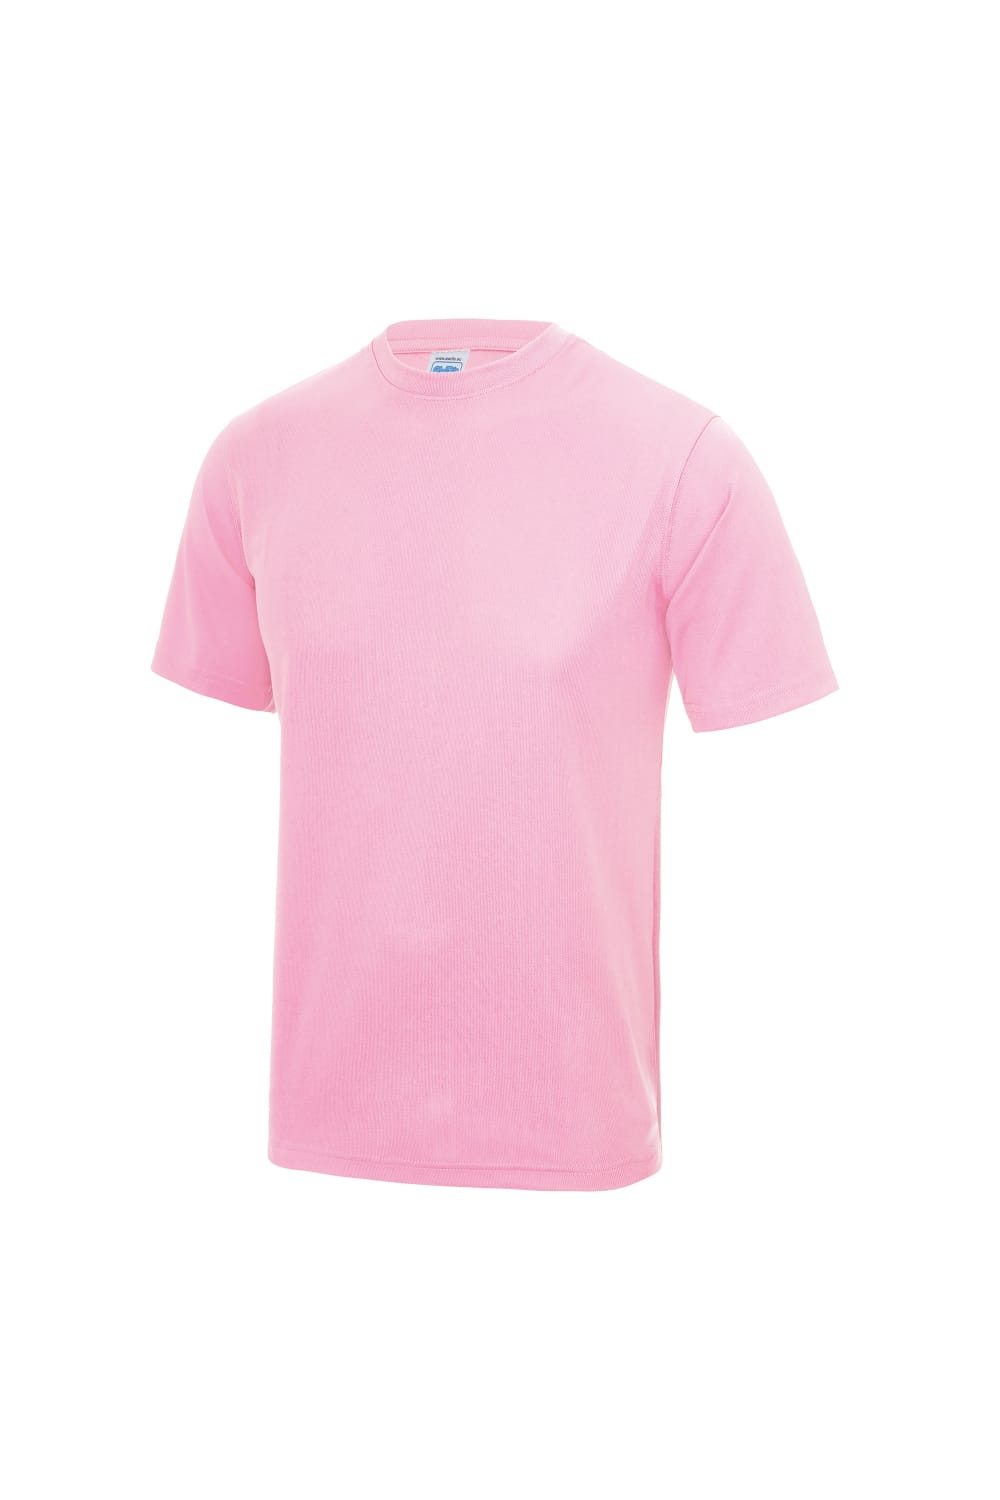 Just Cool Mens Performance Plain T-Shirt (Baby Pink)